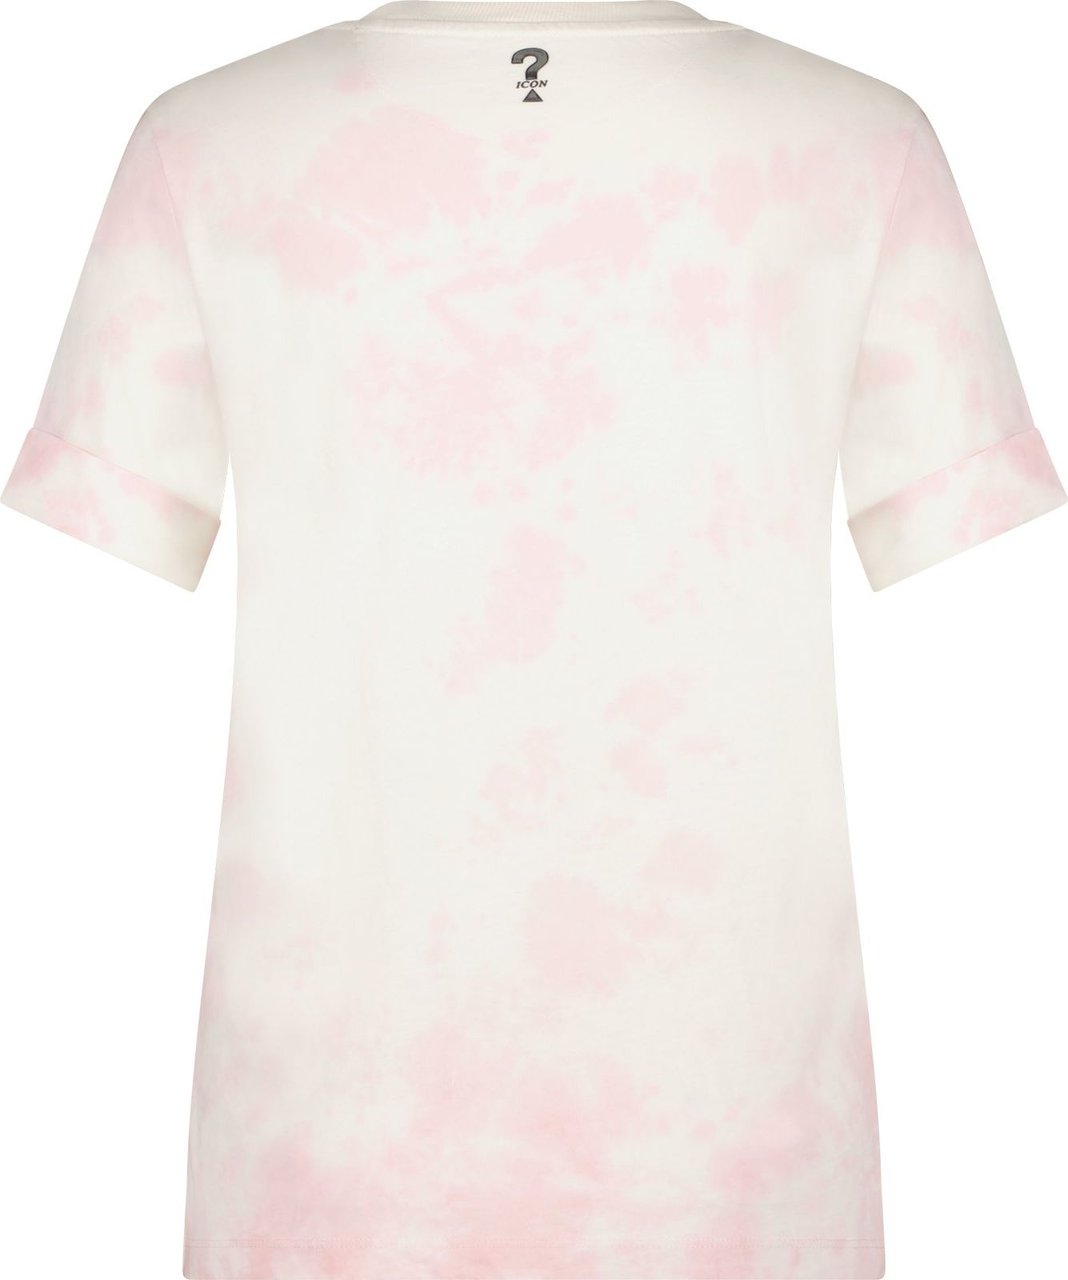 Guess Linjie T-Shirt Dames White/Pink Wit